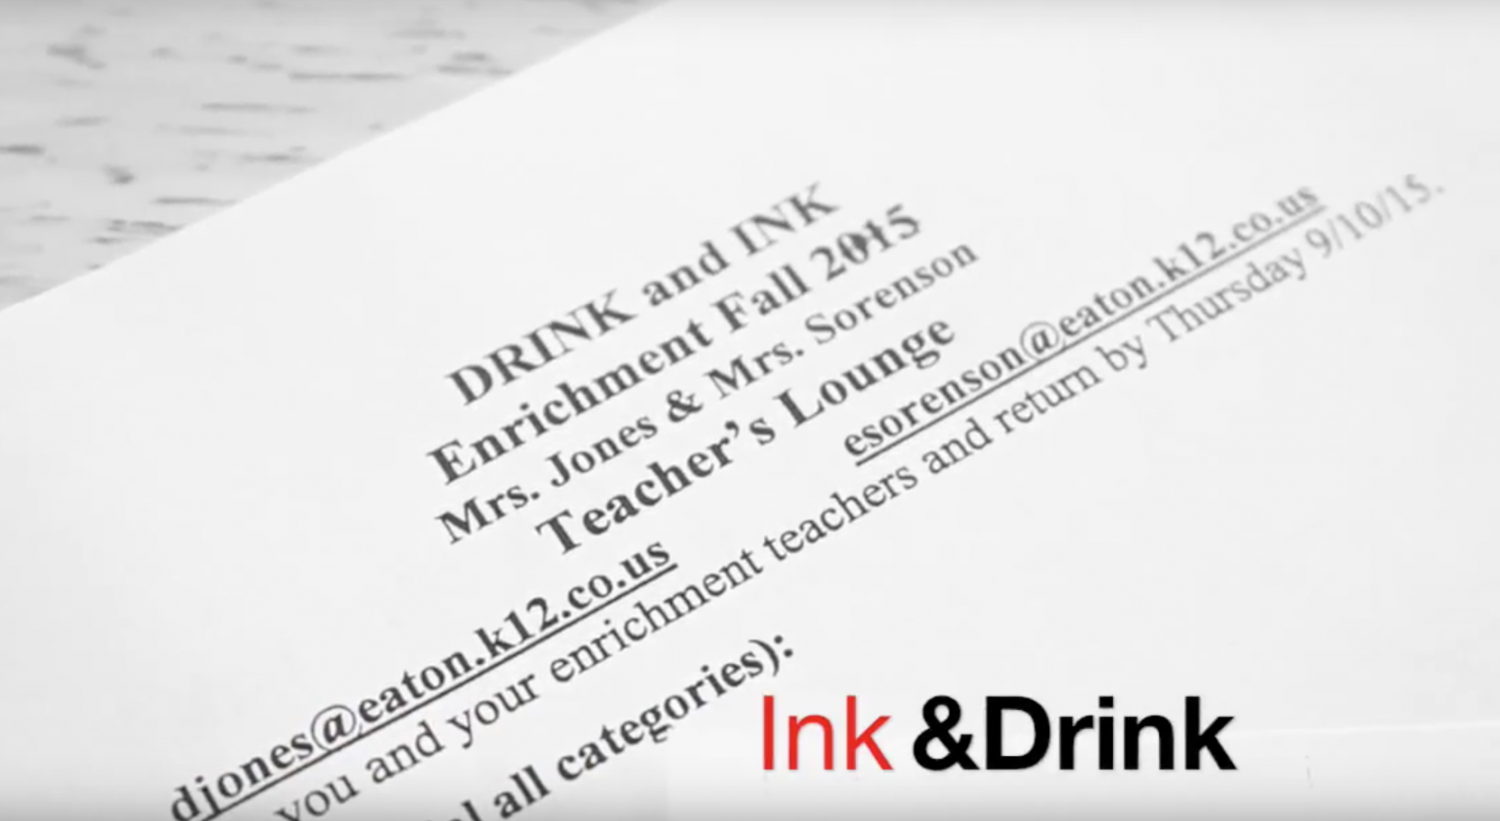 Ink and Drink warms up enrichment: a Morris film